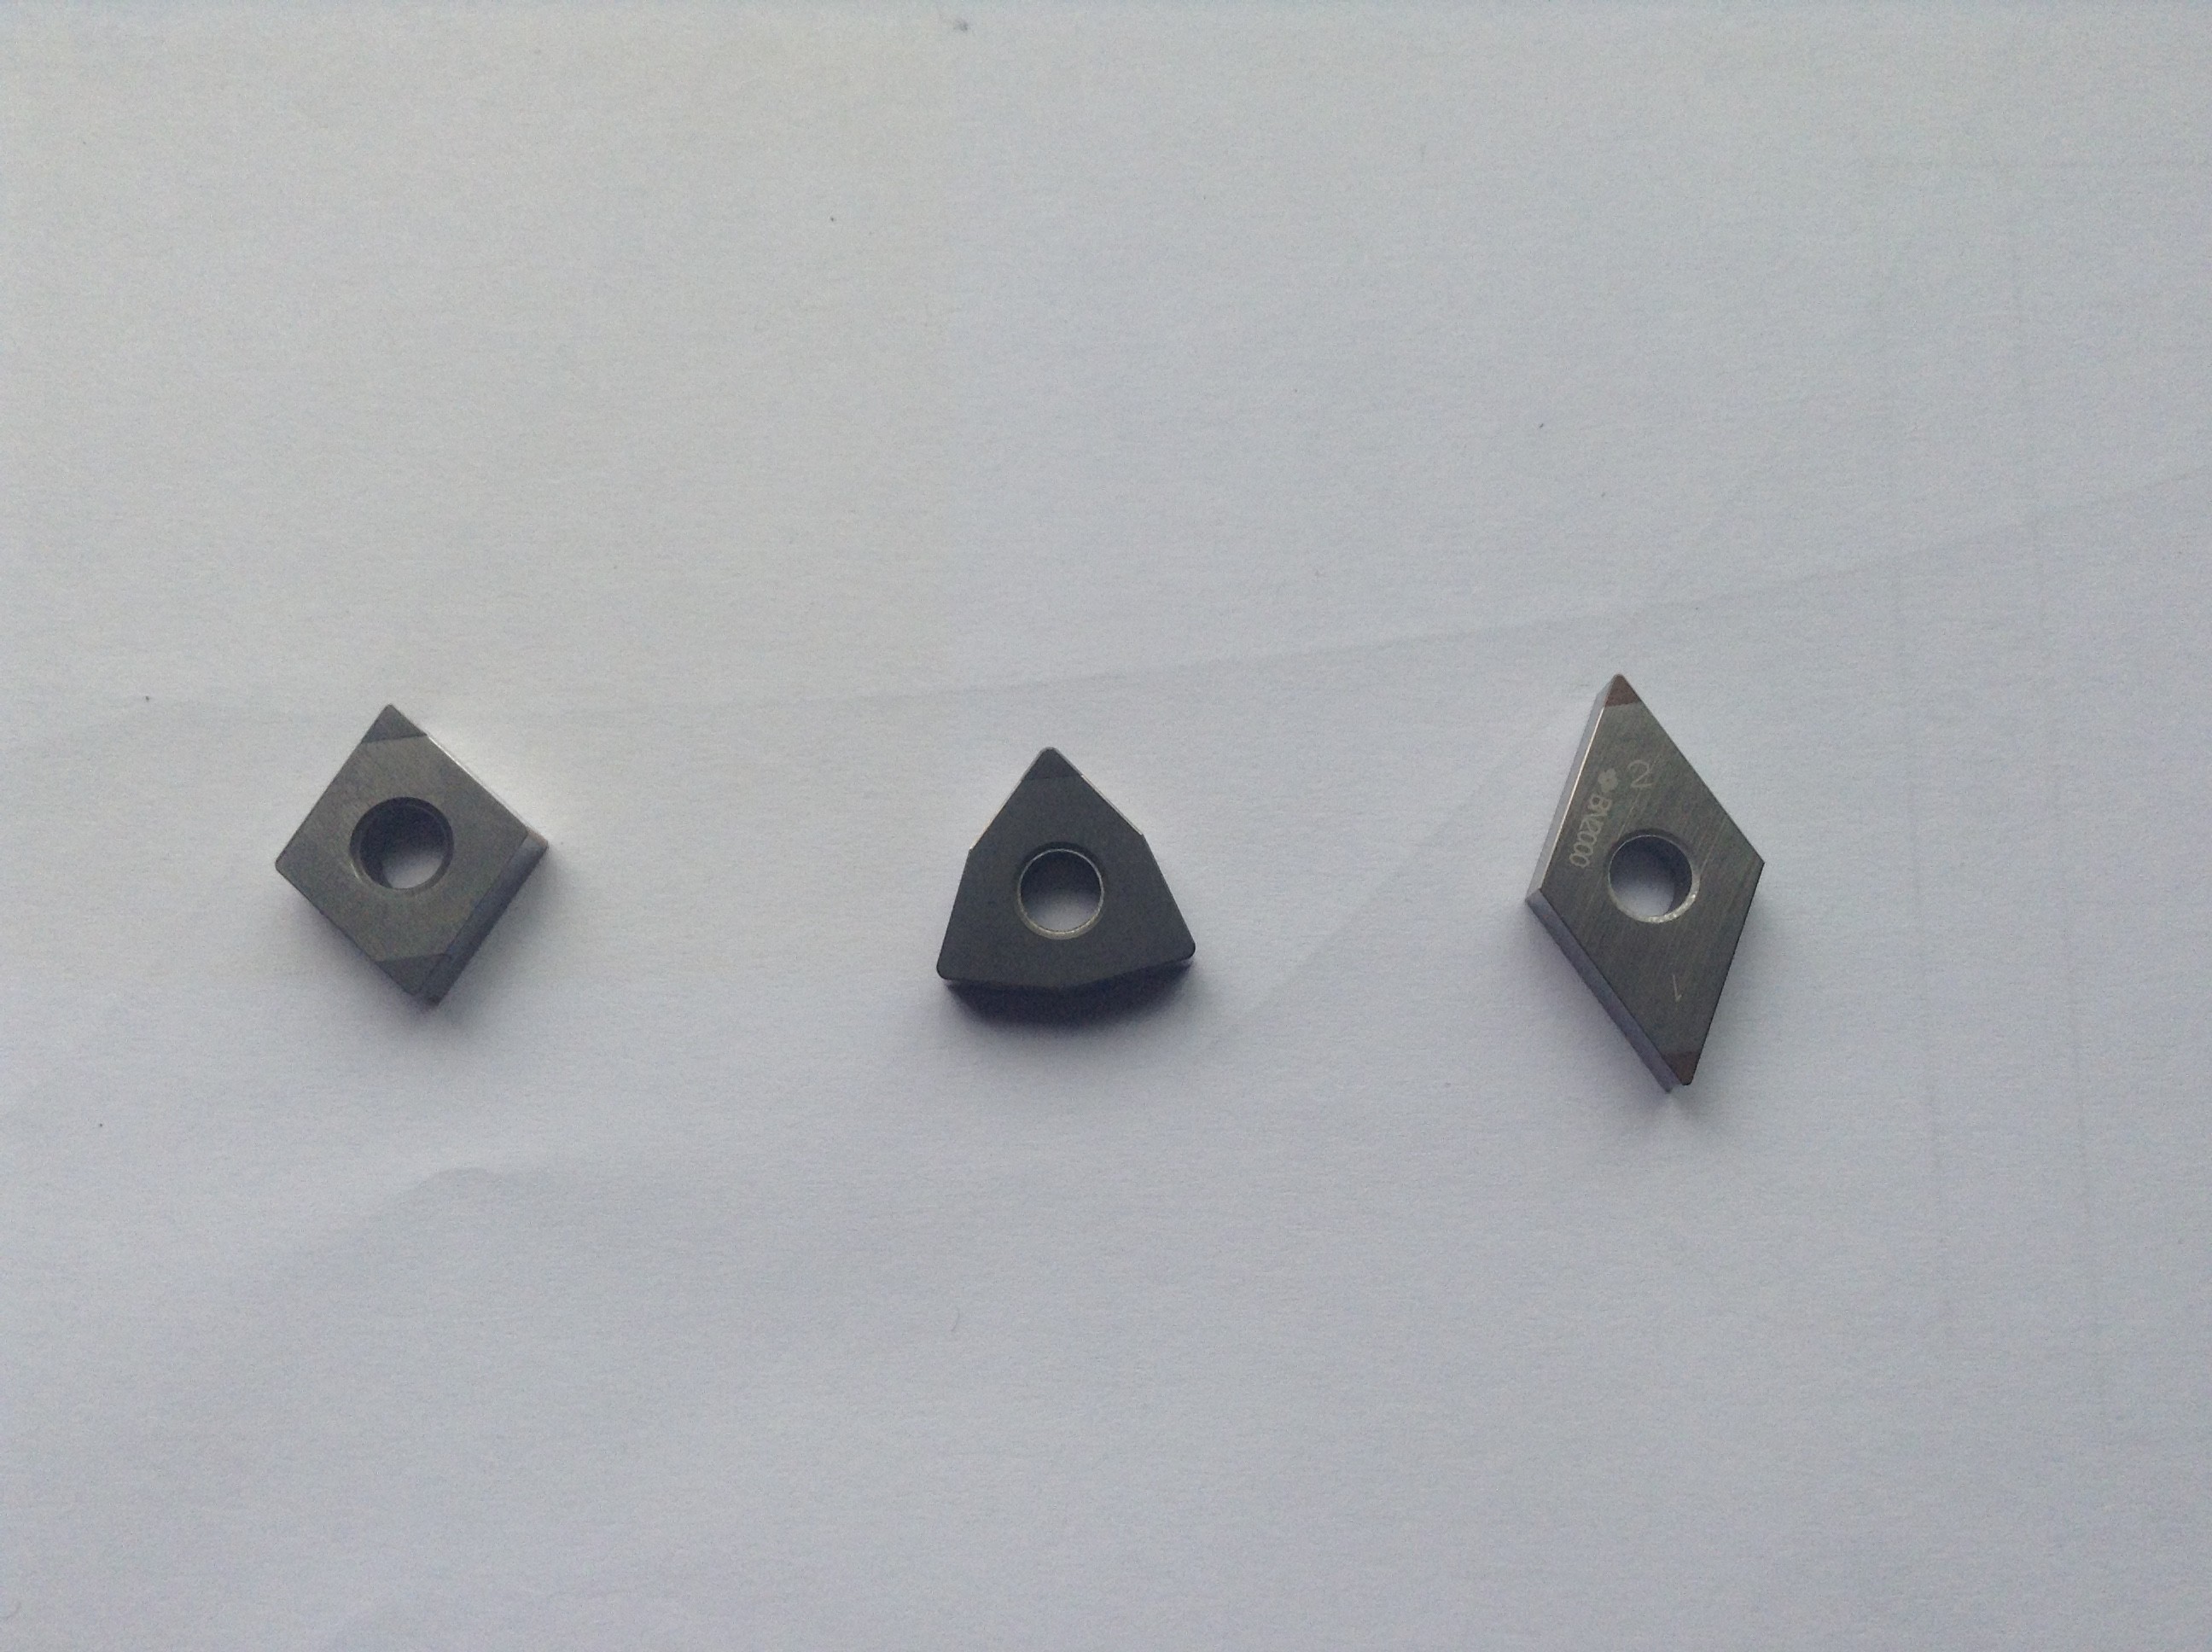 Wholesale PCD CBN Turning Insert Silver Super Hard Cutting Tools Customized from china suppliers